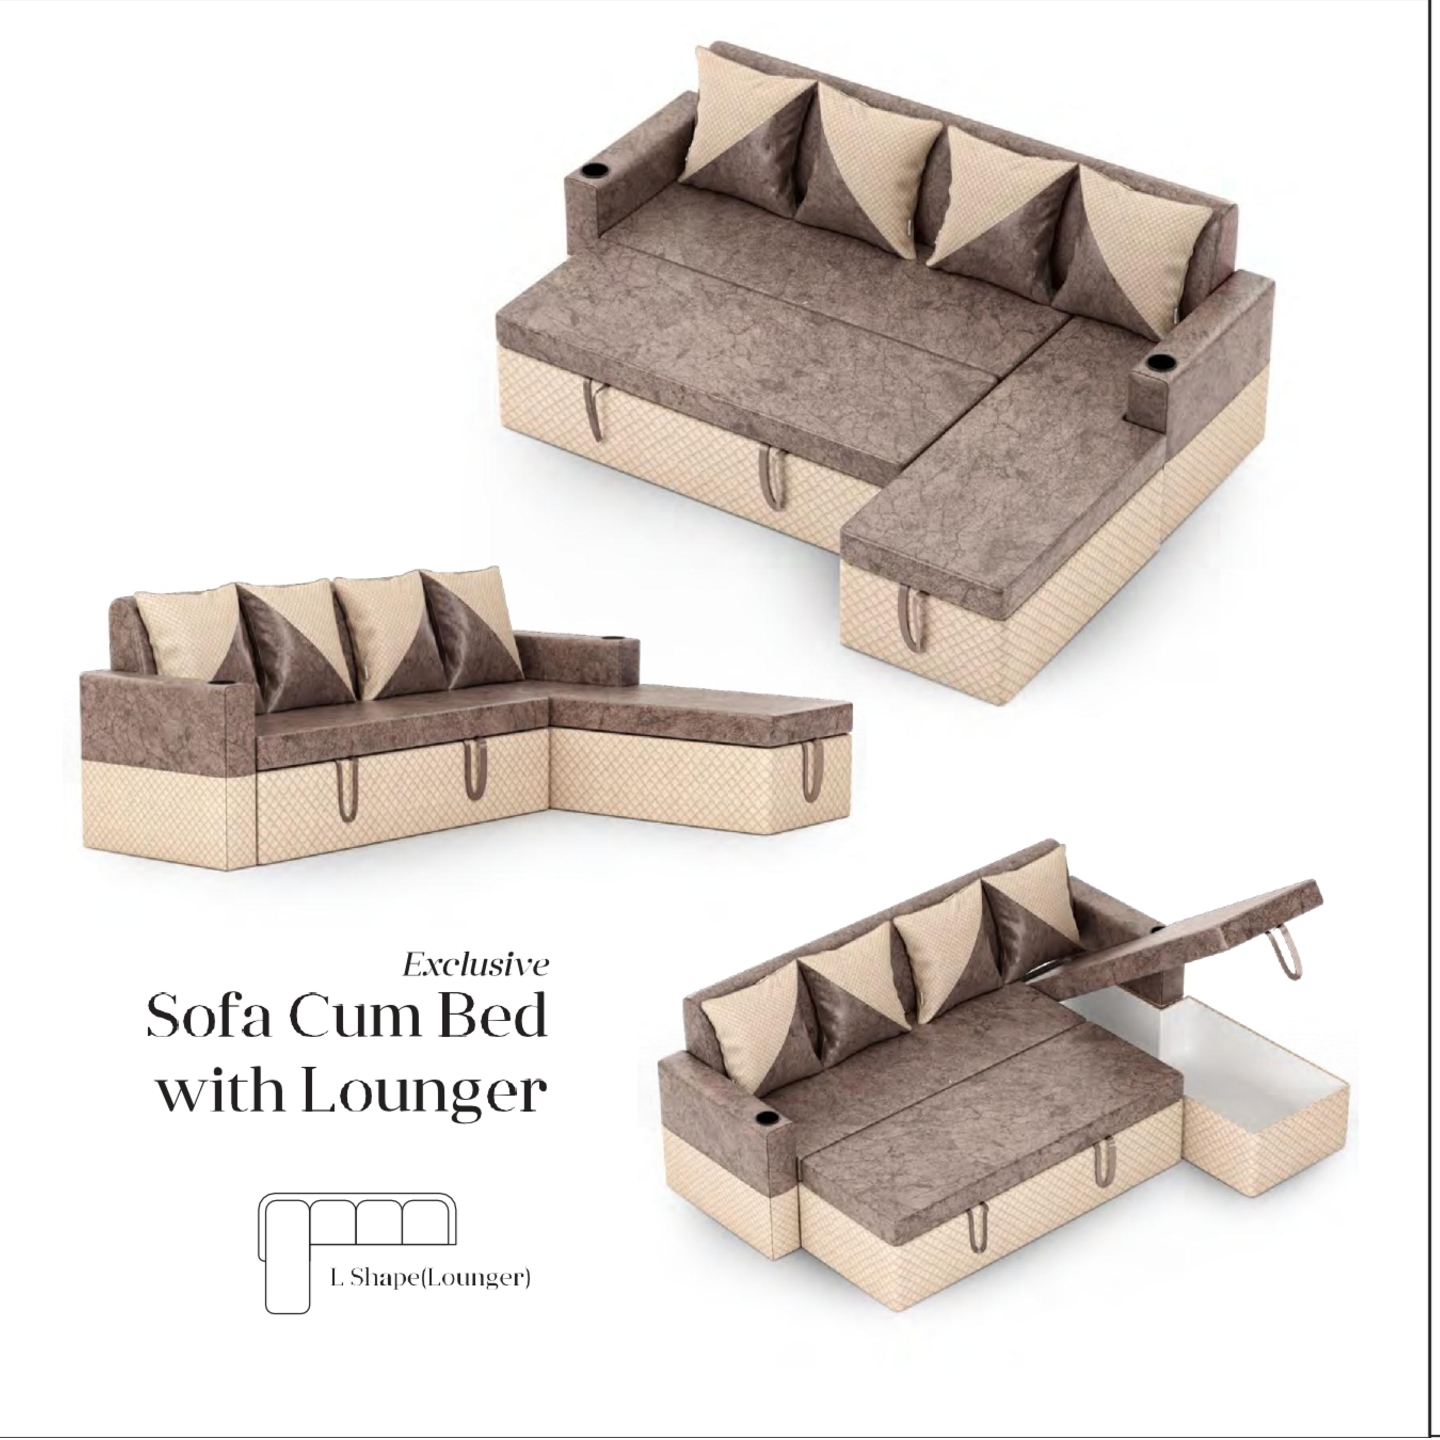 RLF Corner Sofa Cam Bed With Lounger In Brown & Cream Colour